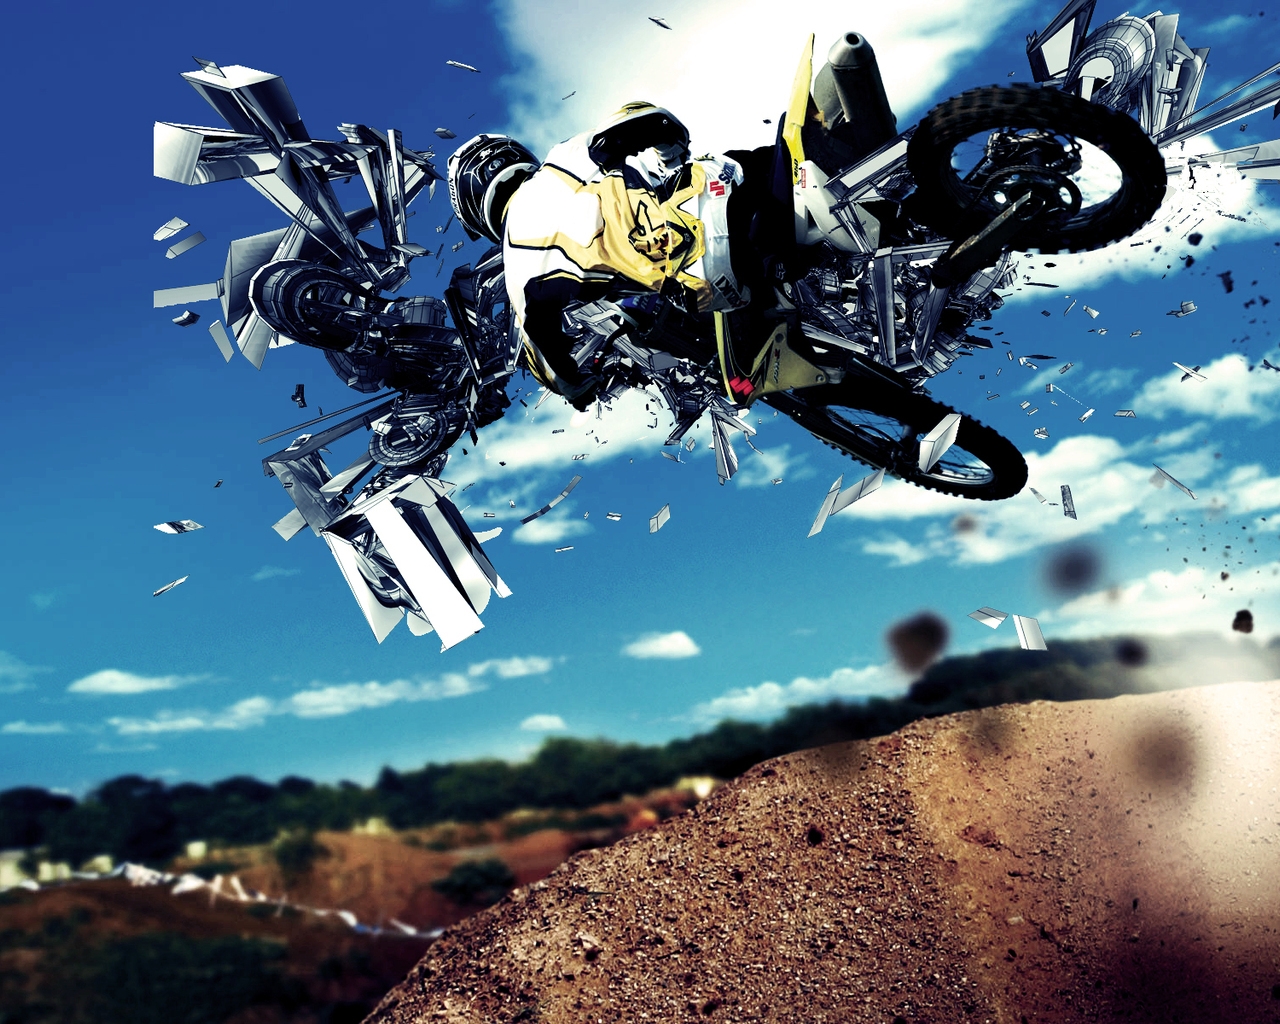 Motorcycle Race for 1280 x 1024 resolution